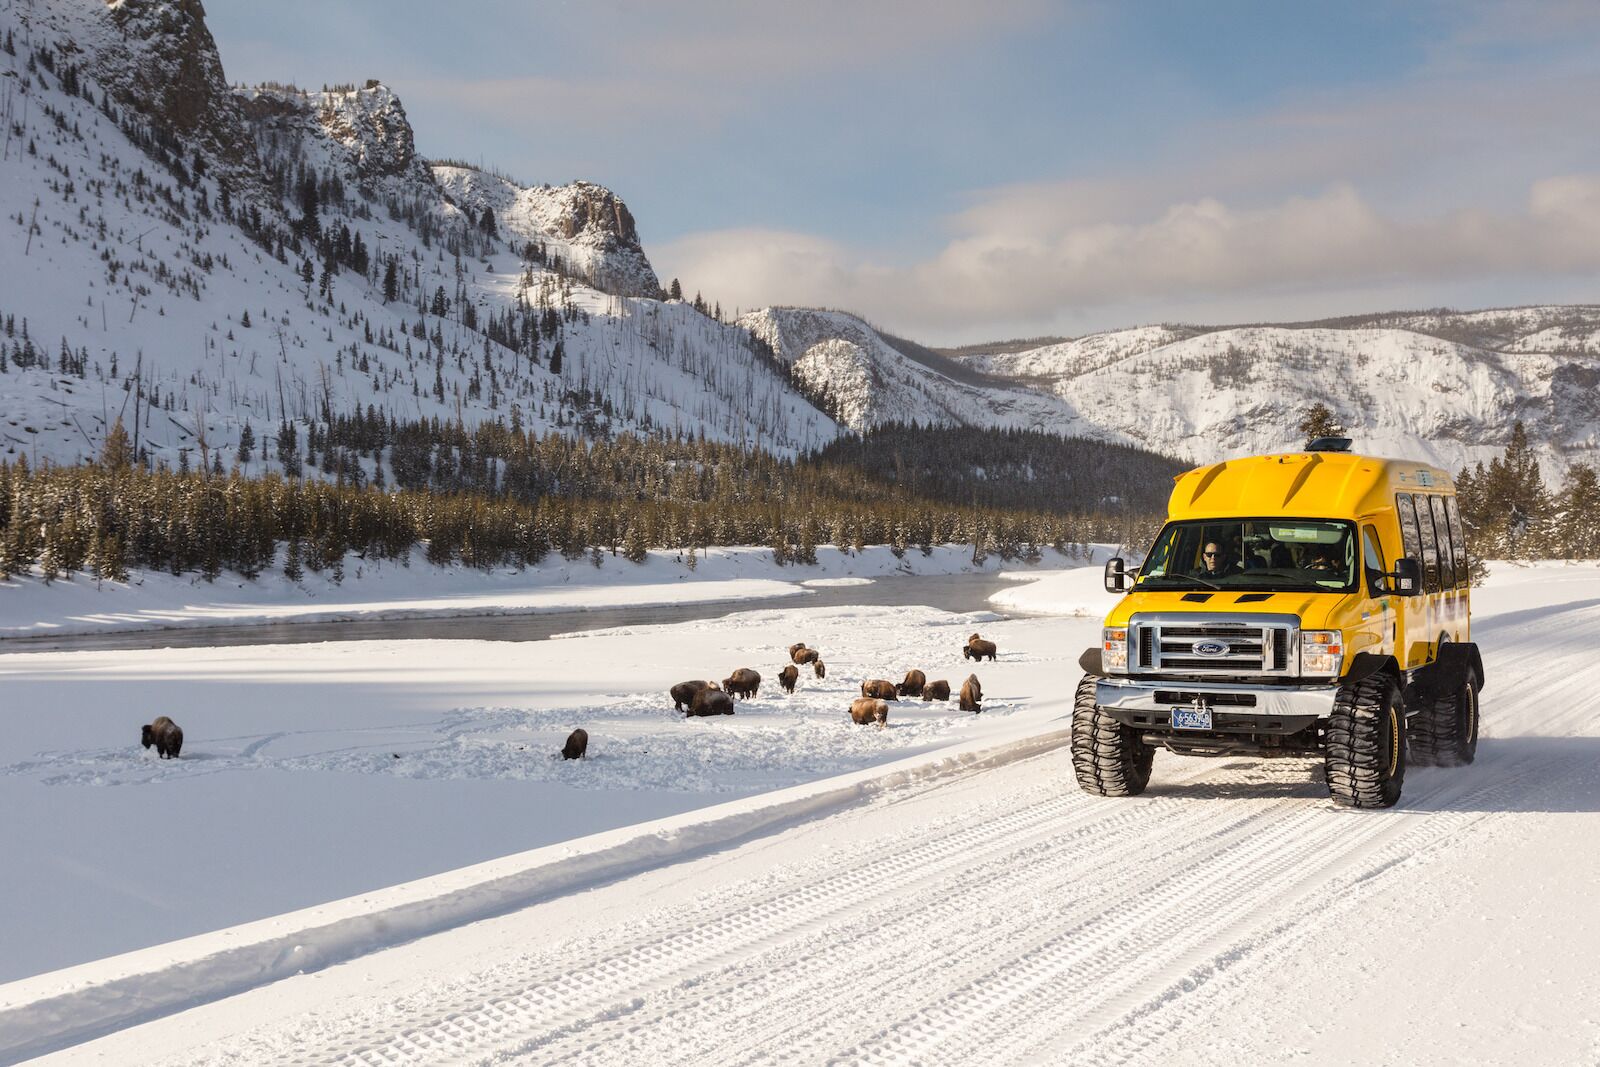 snowcoach in winter best tiume to visit yellowstone